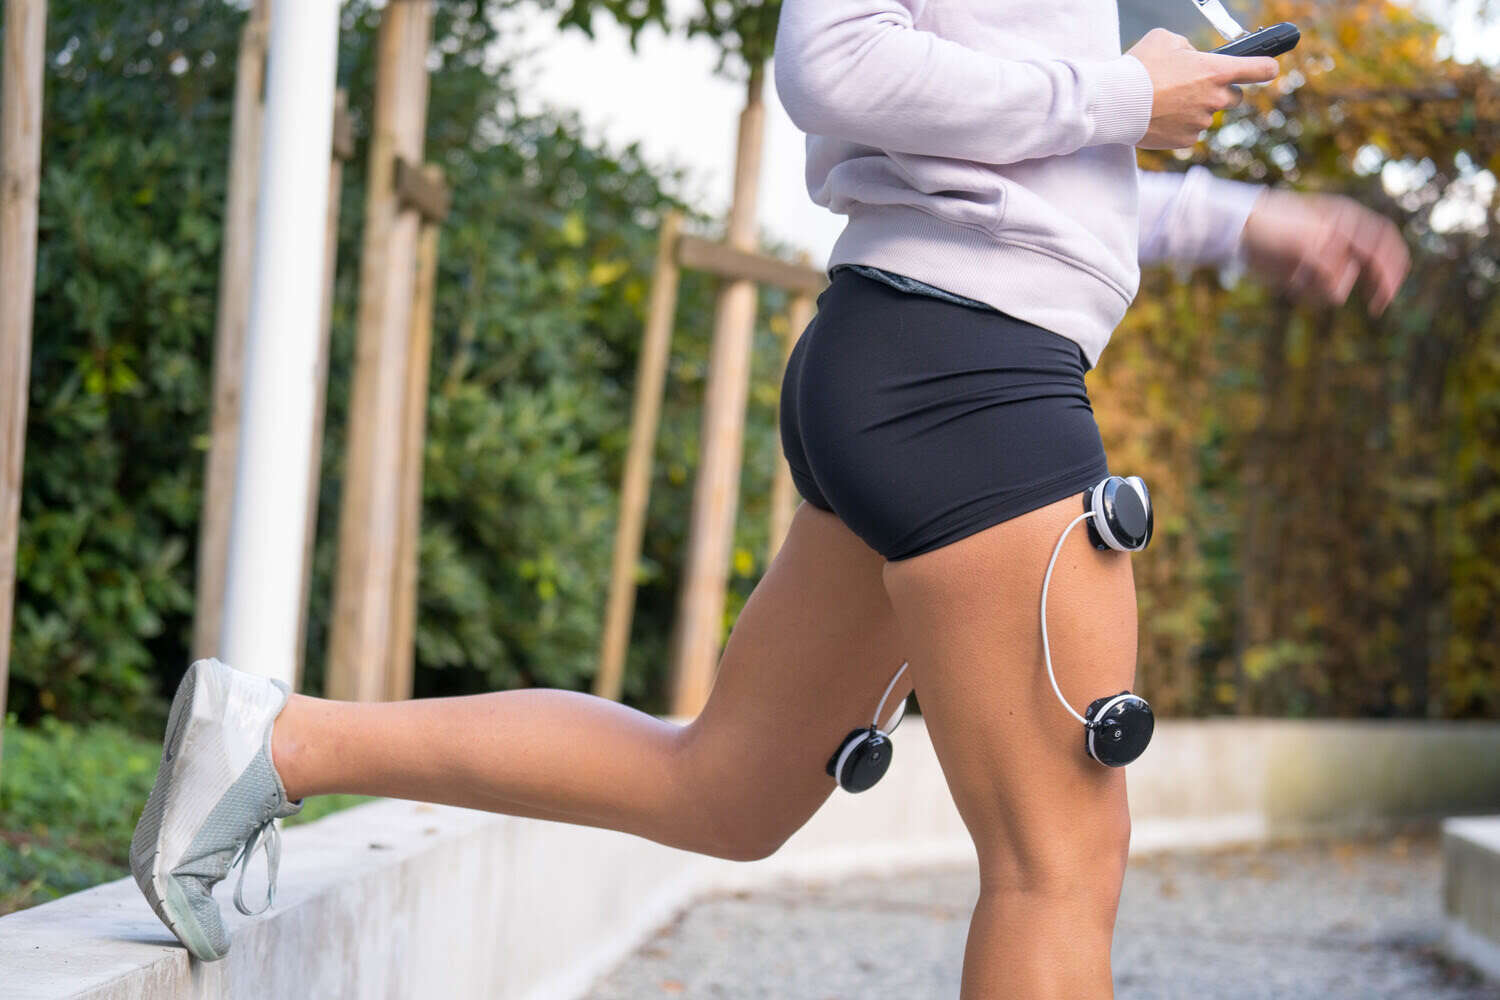 Tone your thighs using the Compex SP 8.0 muscle stimulator